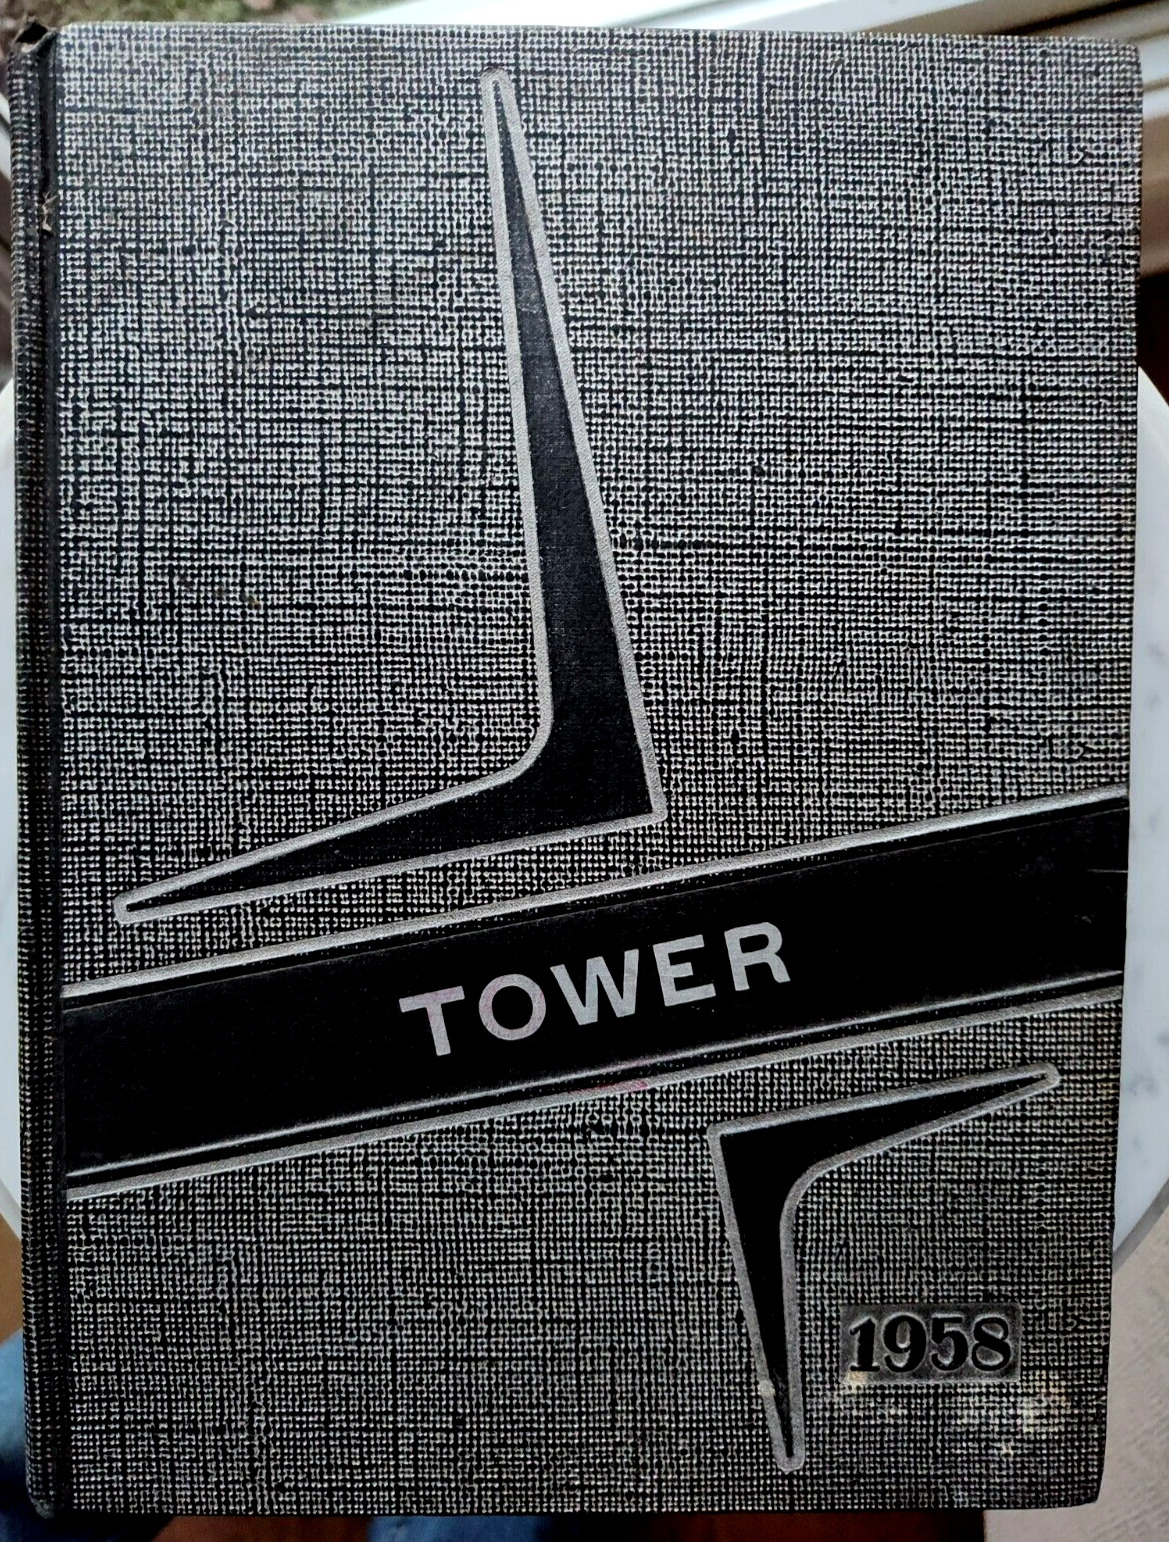 1958 Pavilion NY Central High School Yearbook Grades K- 12 THE TOWER